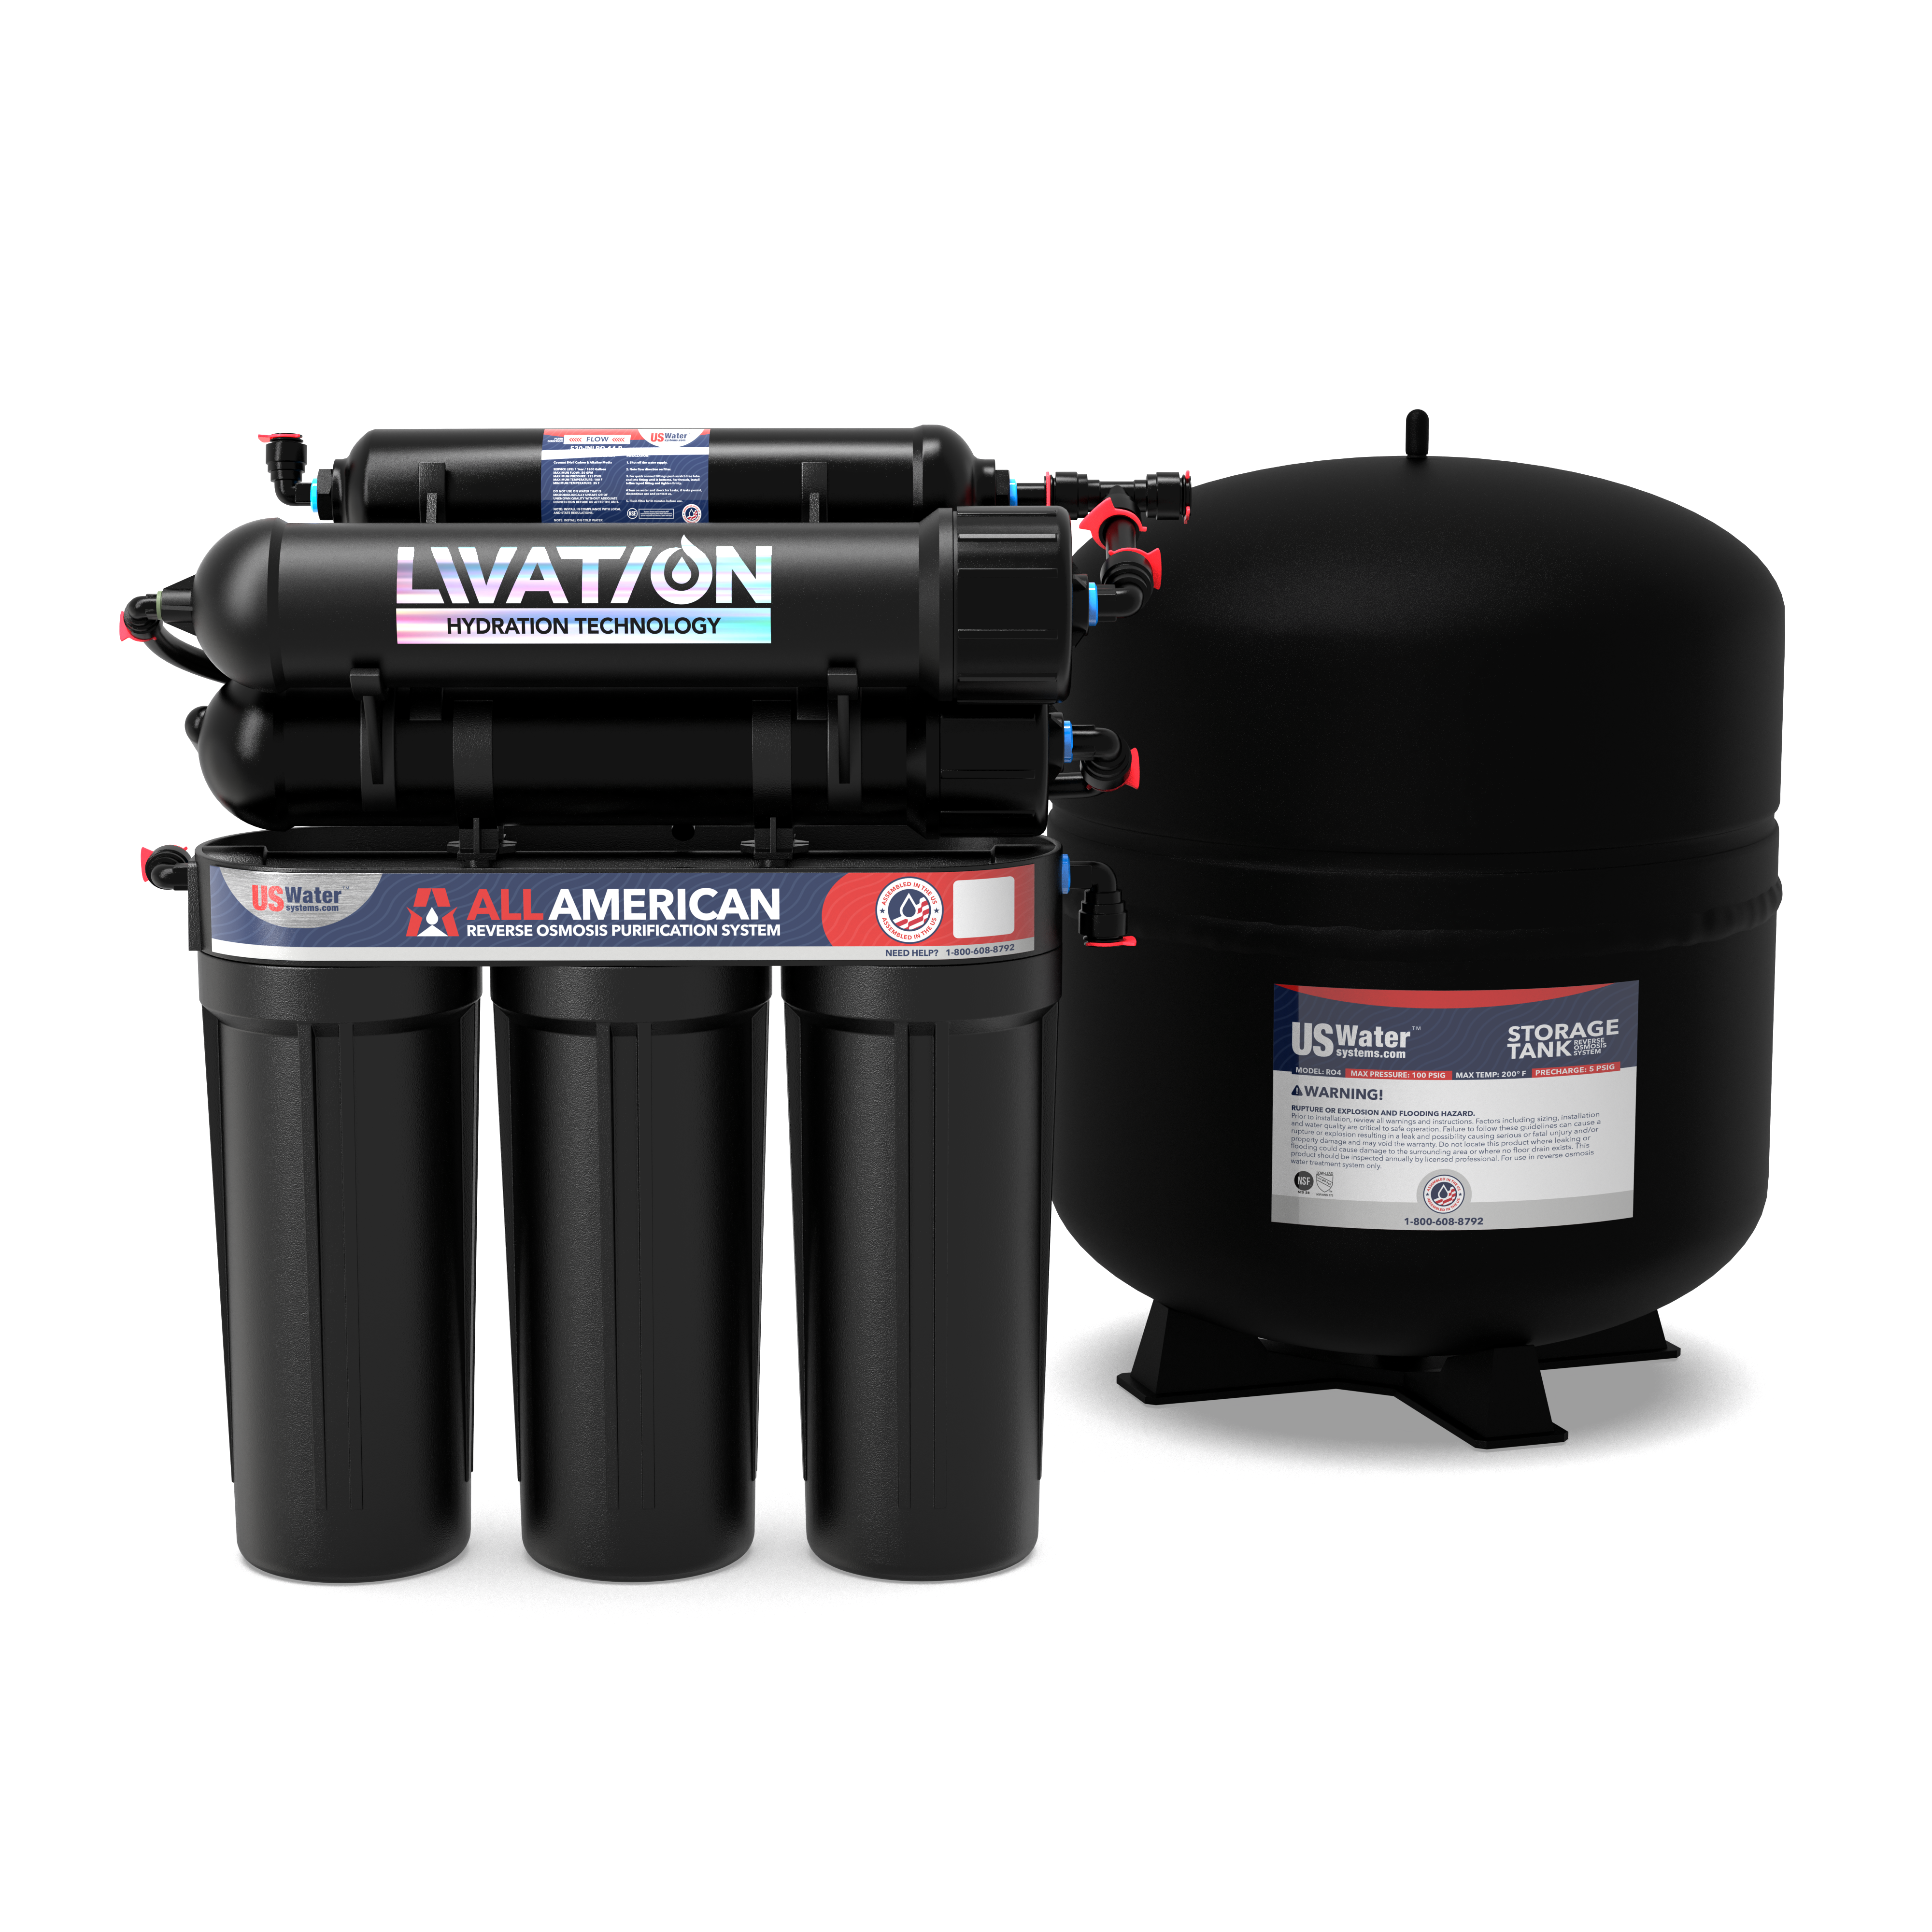 All American 6 Stage Alkaline Reverse Osmosis System